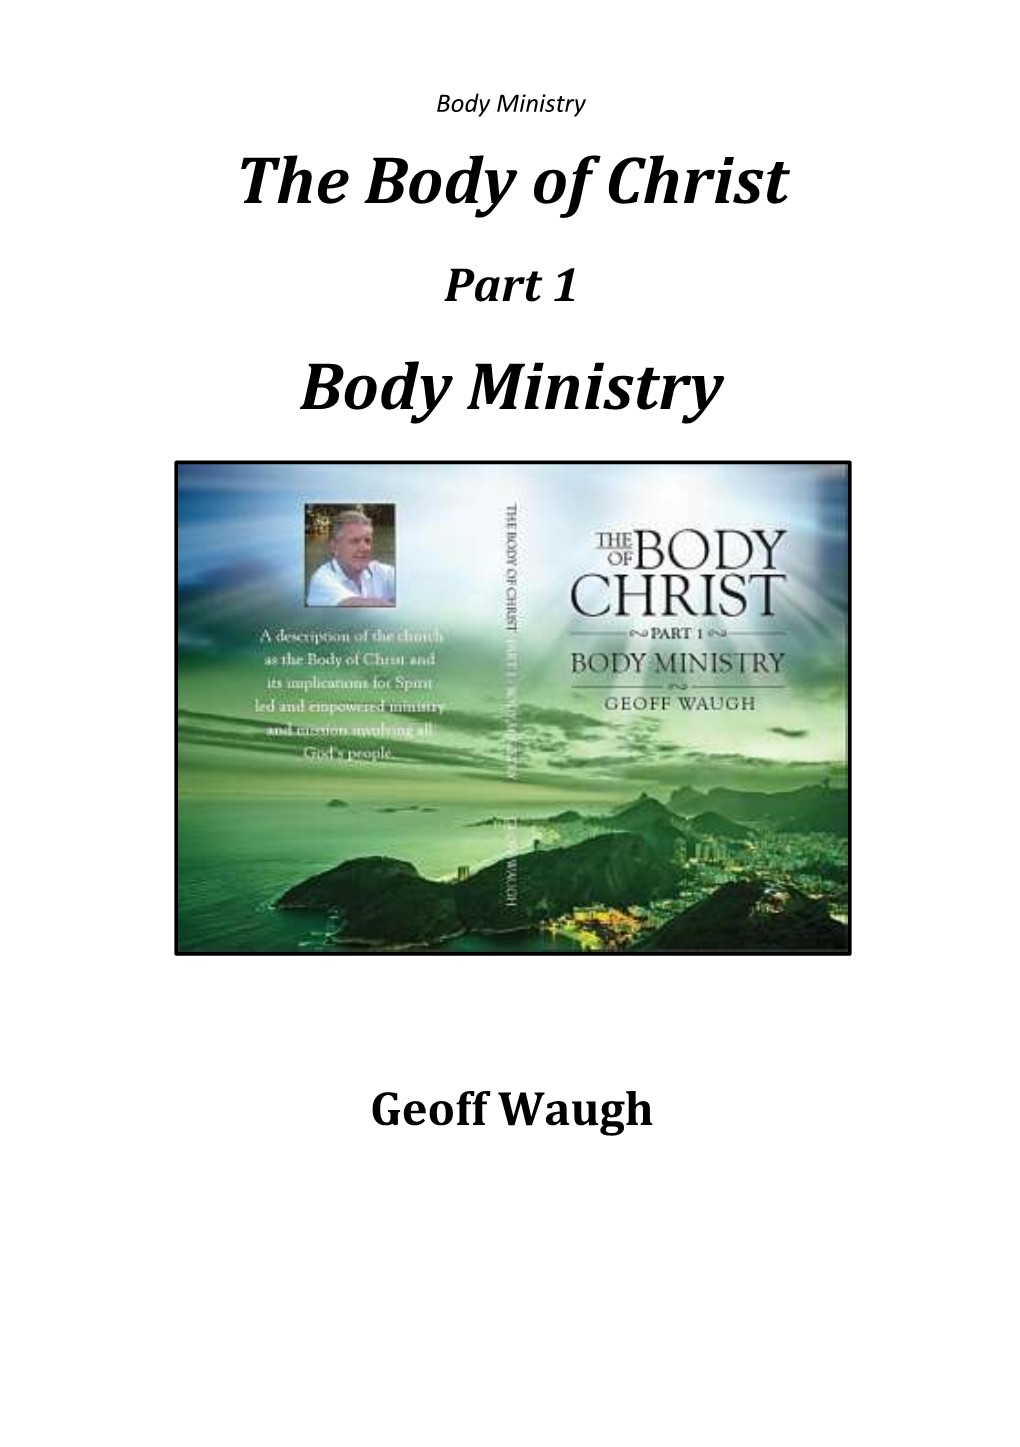 The Body of Christ, Part 1, Body Ministry